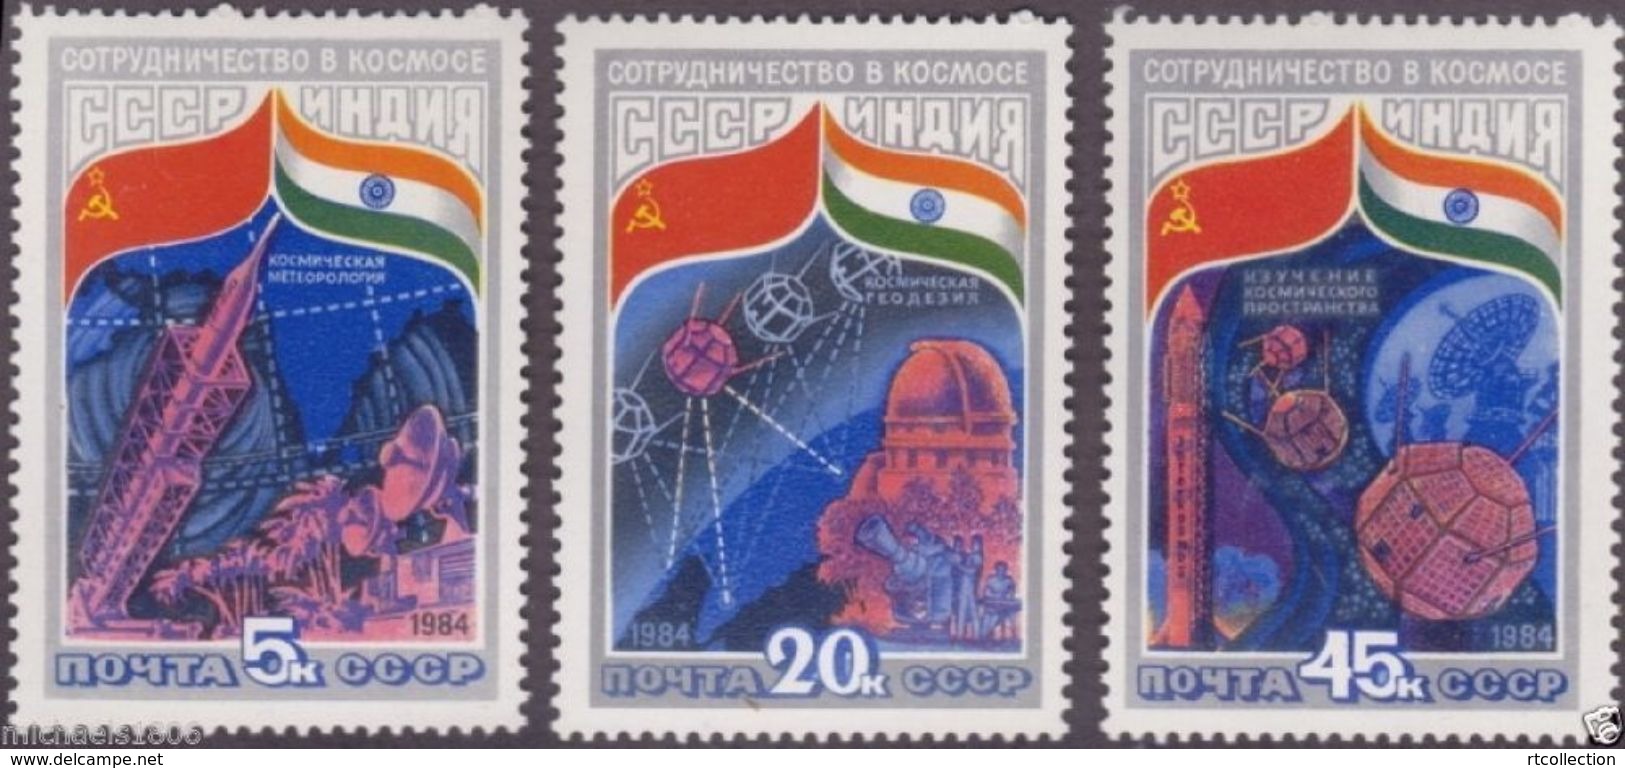 USSR Russia 1984 India Intercosmos Cooperative Space Program Weather Station Rocket Flags Stamps MNH Michel 5371-5373 - Briefmarken